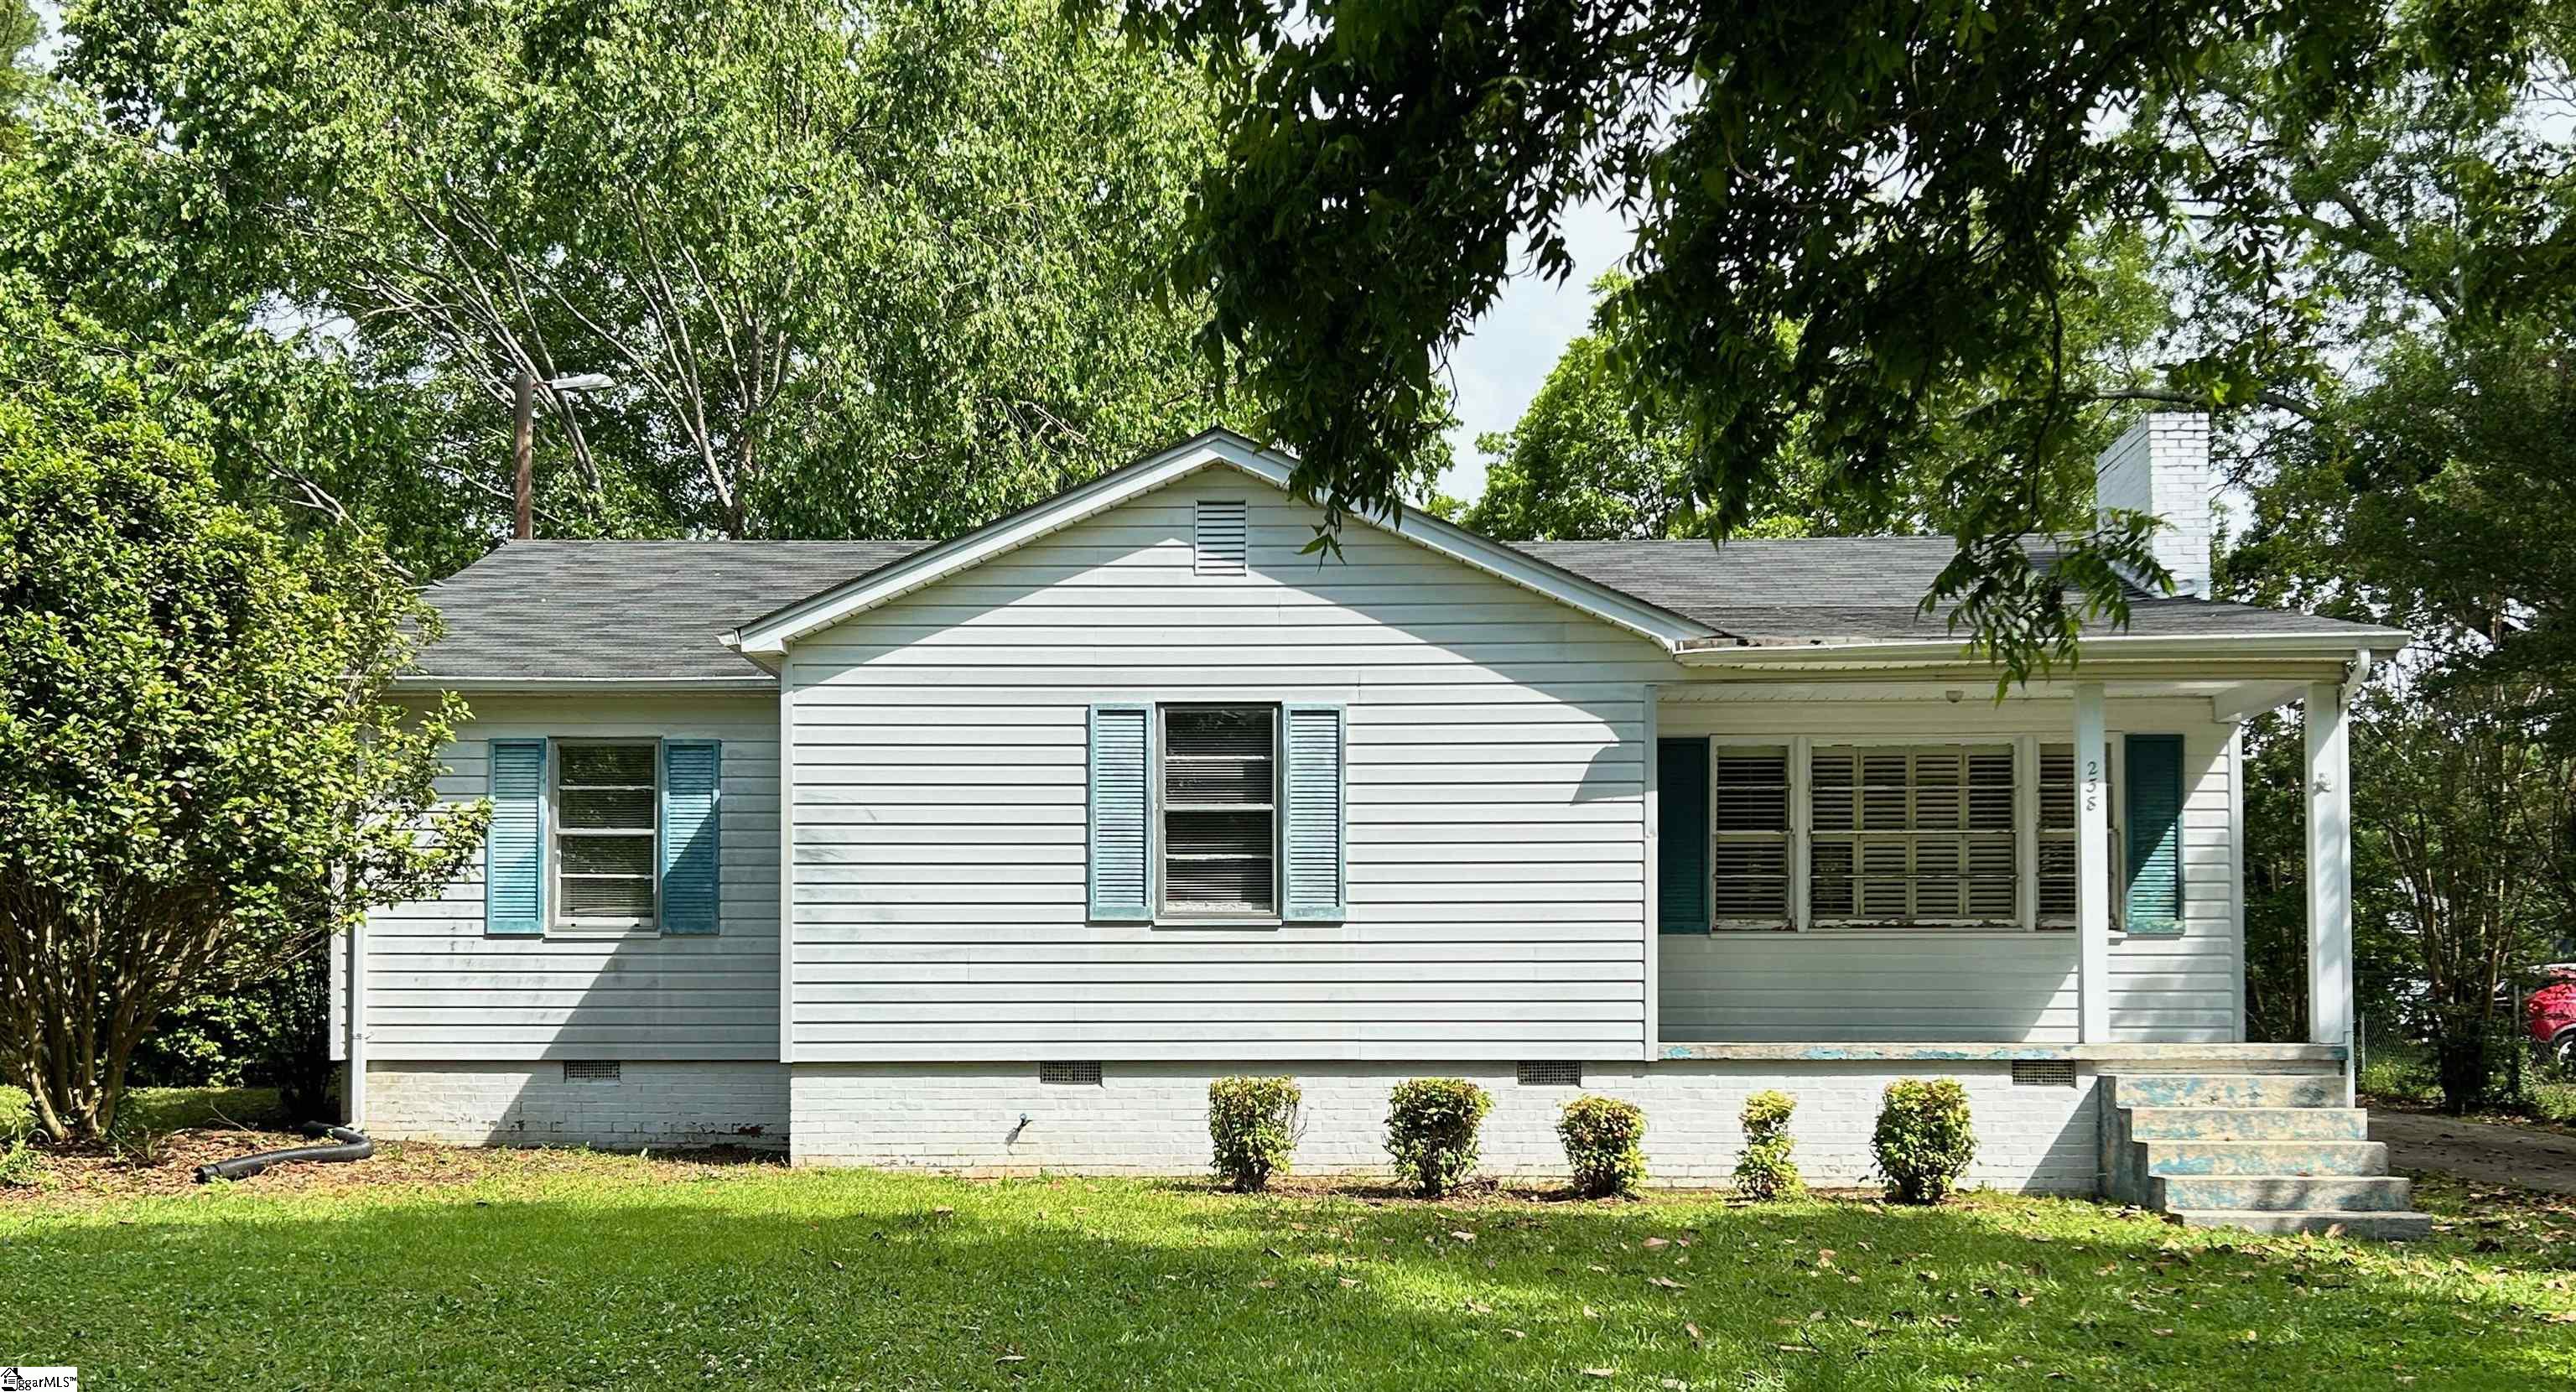 Come see 238 Belton Drive with its great curb appeal! This 3 bedroom 1.5 bath home features beautiful hardwood floors throughout most of the home and gas logs in the living room! Convenient to all the amenities of the Town of Williamston and just minutes from the mineral springs park!